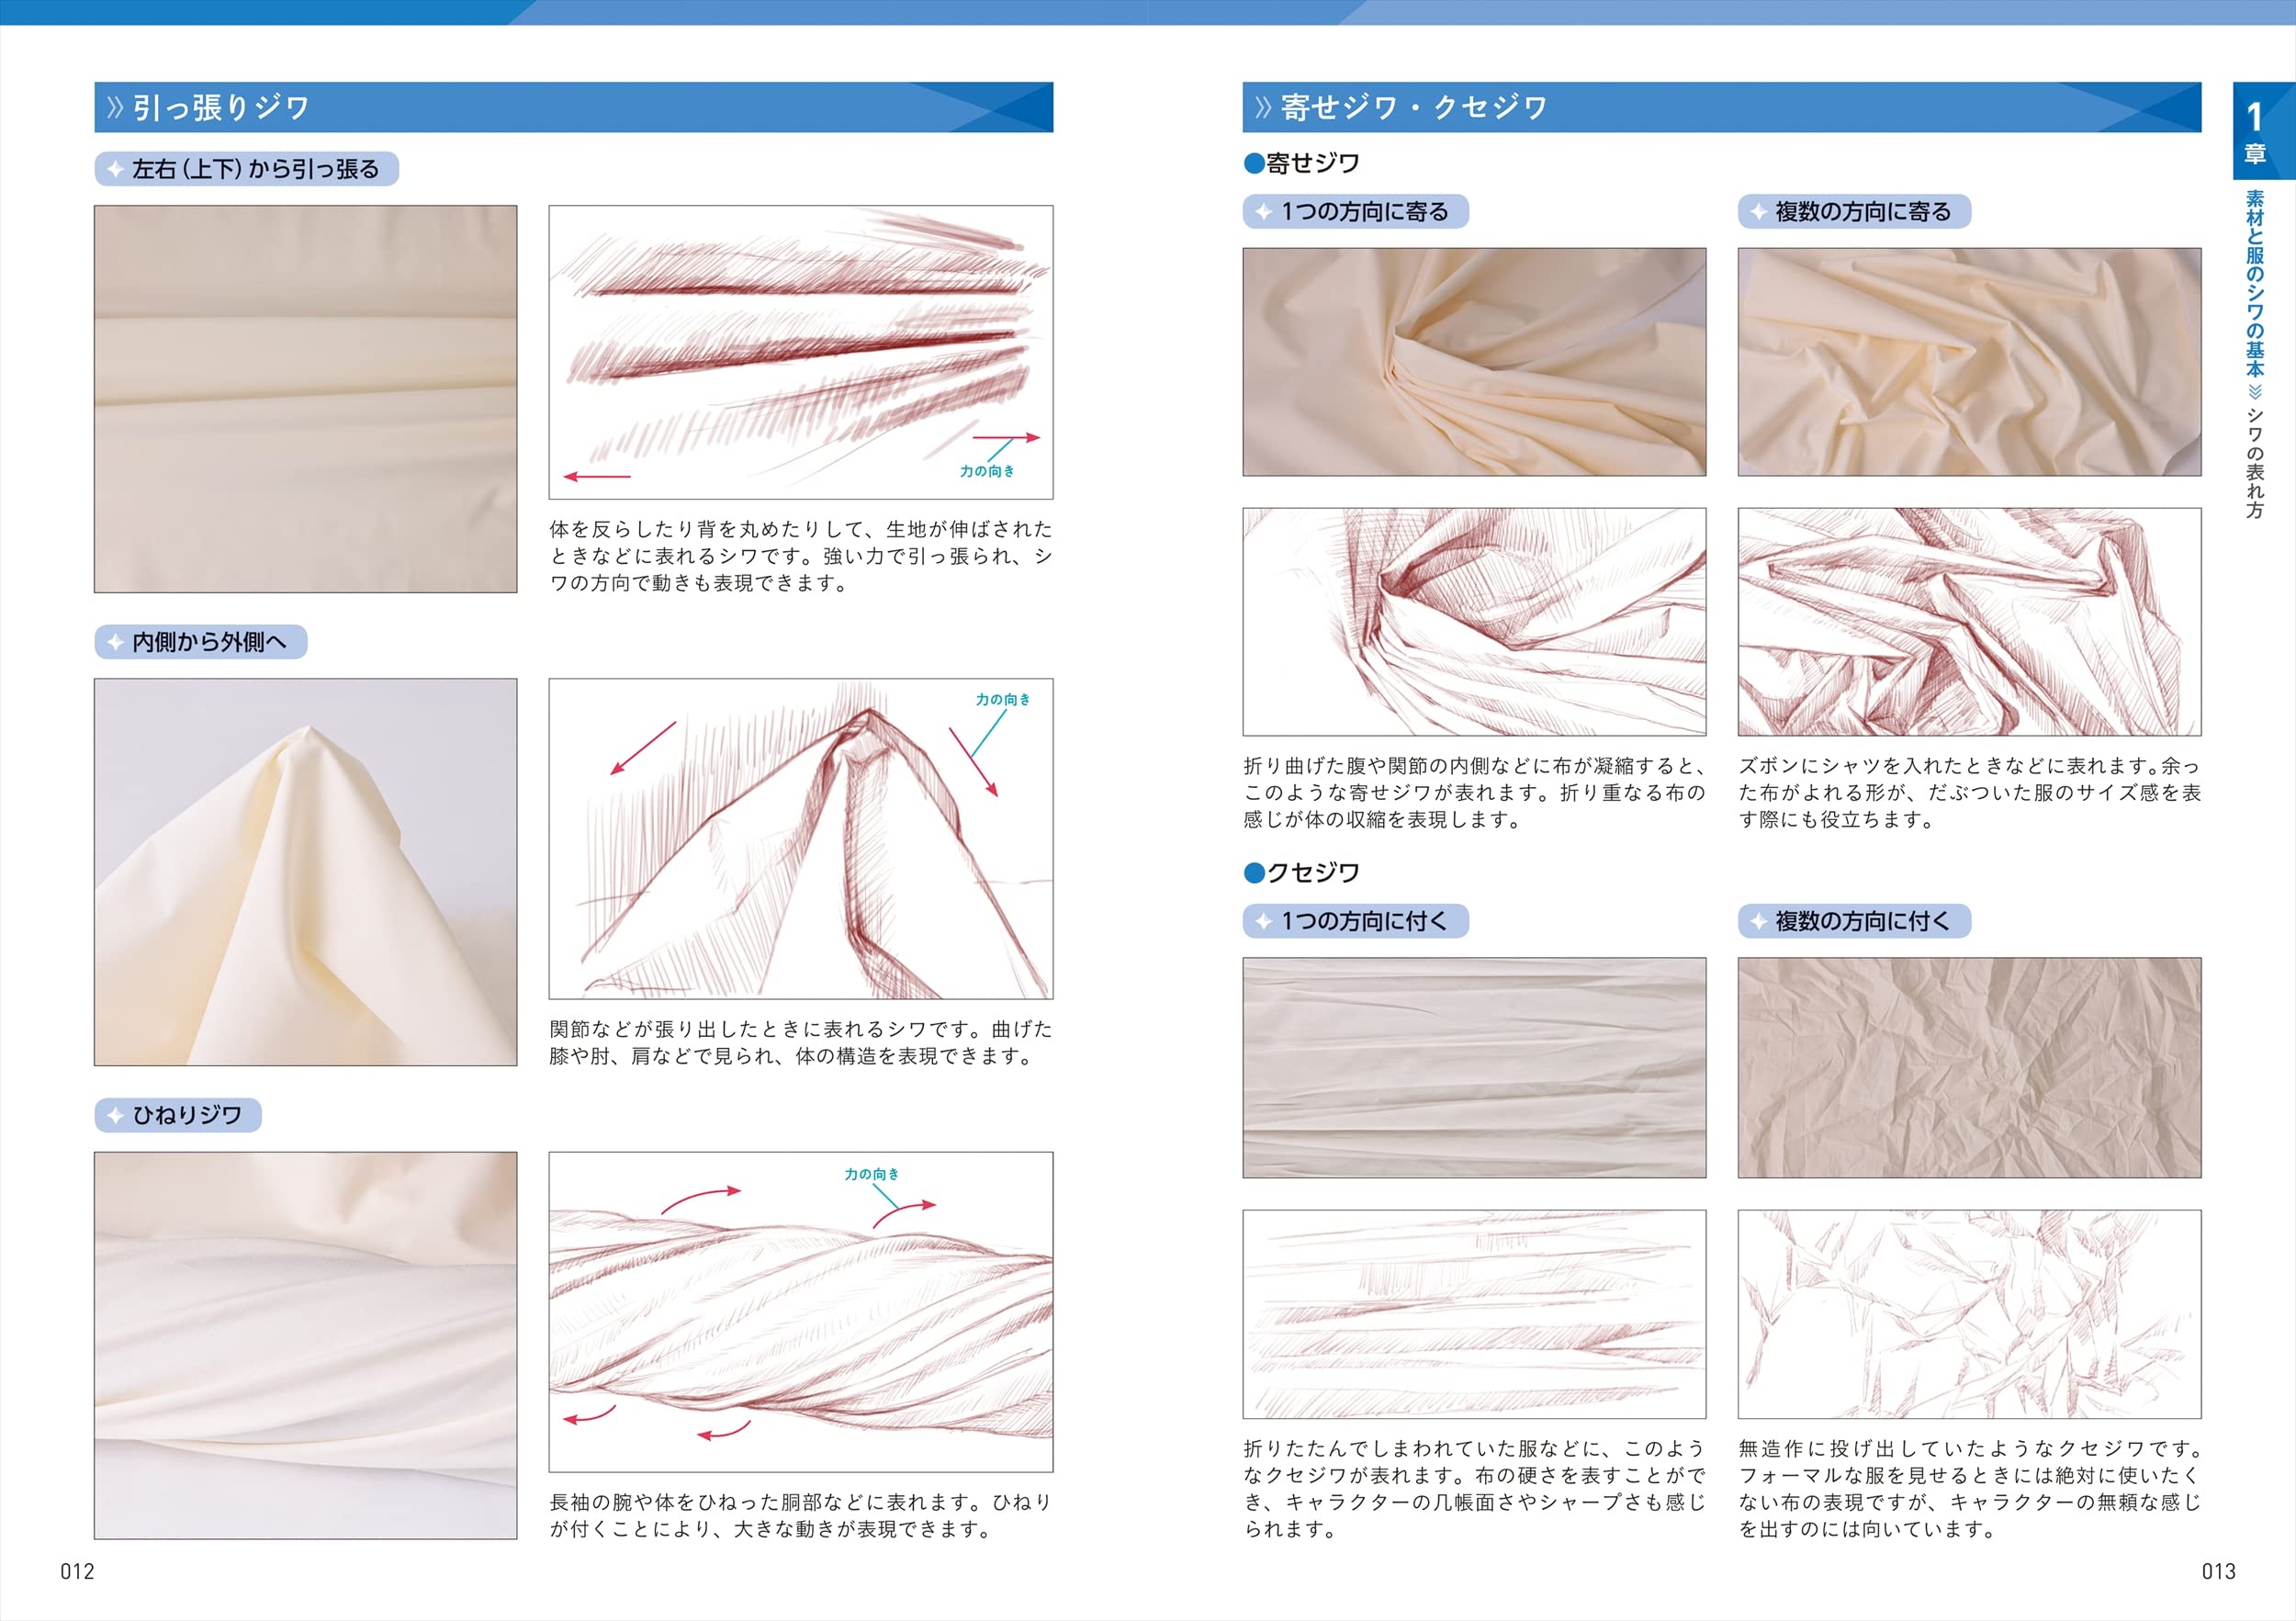 A thorough explanation of the entire process, How To Draw Wrinkles on Clothes Lesson